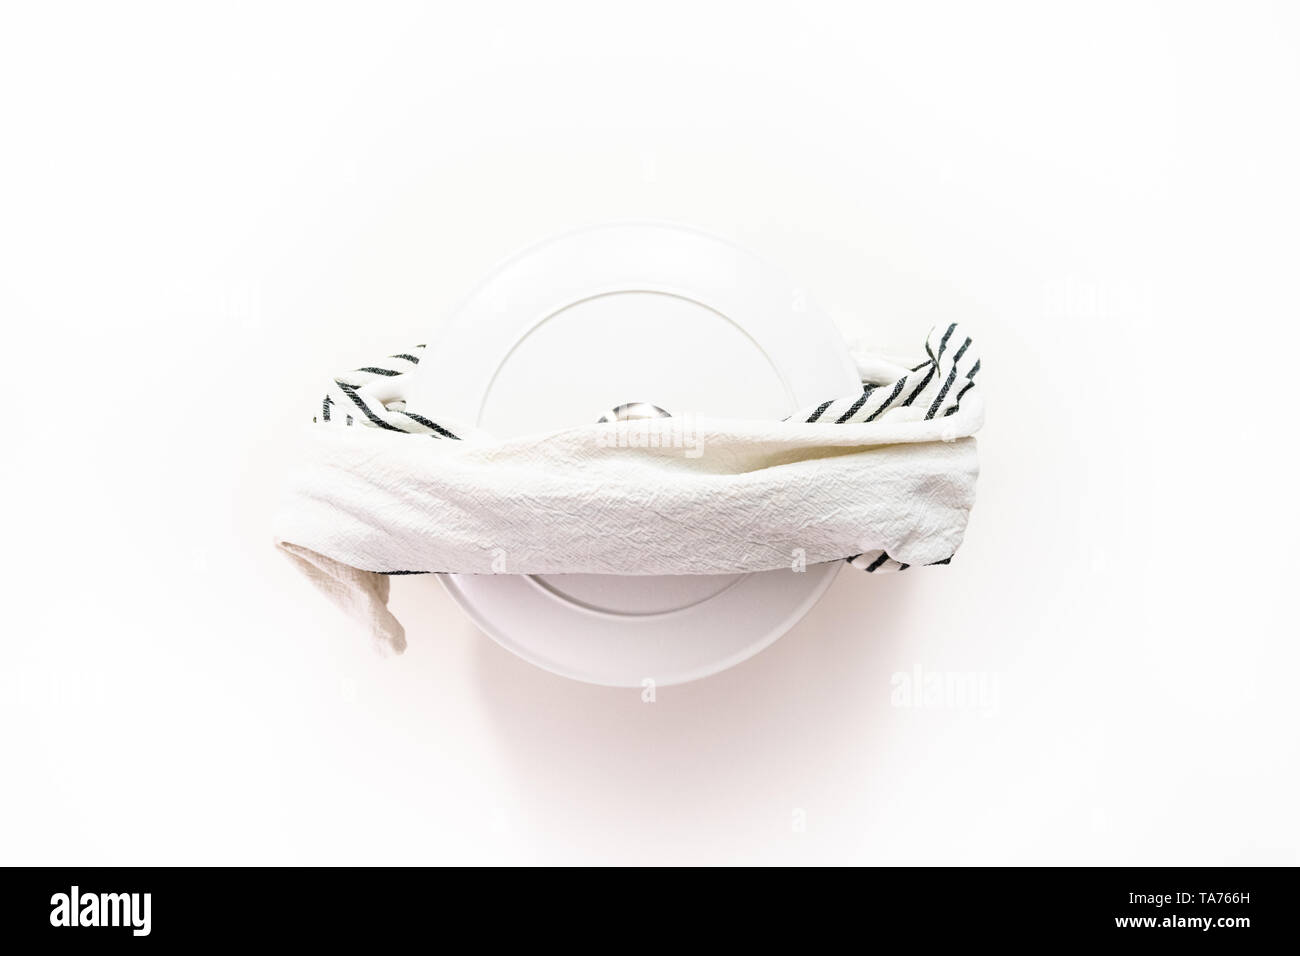 Flat lay. White enameled cast iron covered round dutch oven on a whjite background. Stock Photo